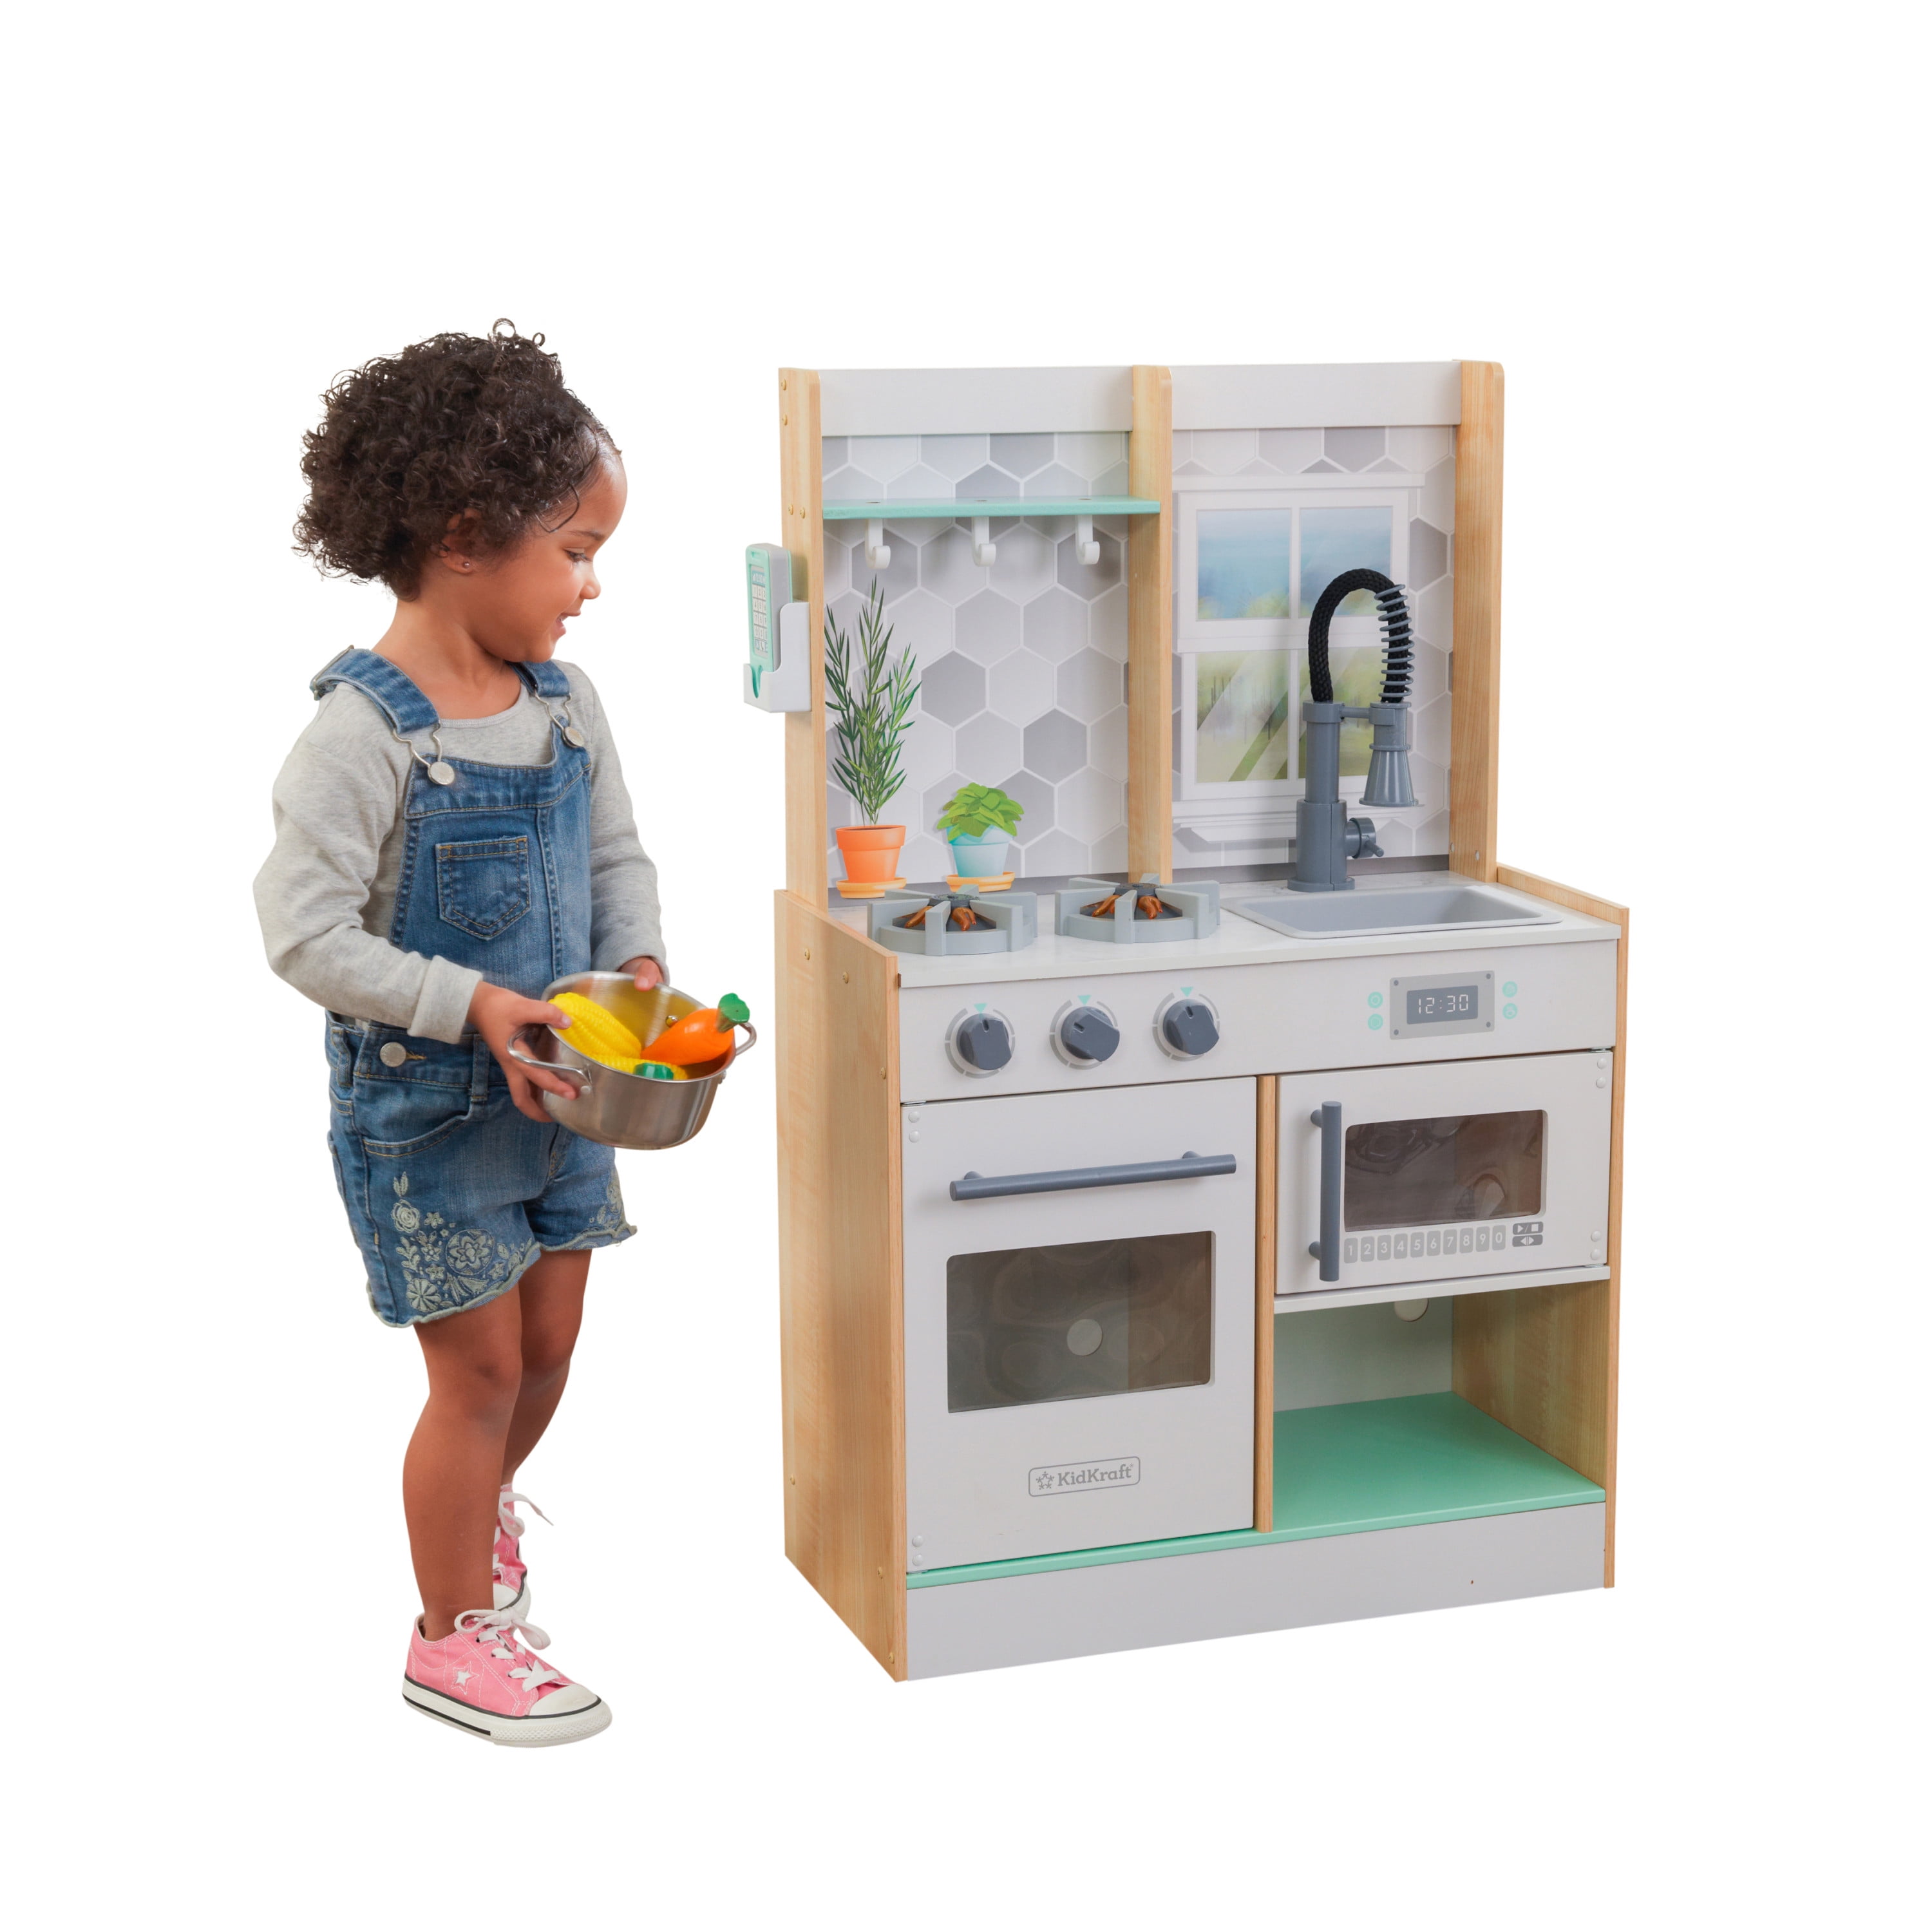 Playhouse TY6133 Kids Wooden Playset Pretend Kitchen Role Play for sale online 